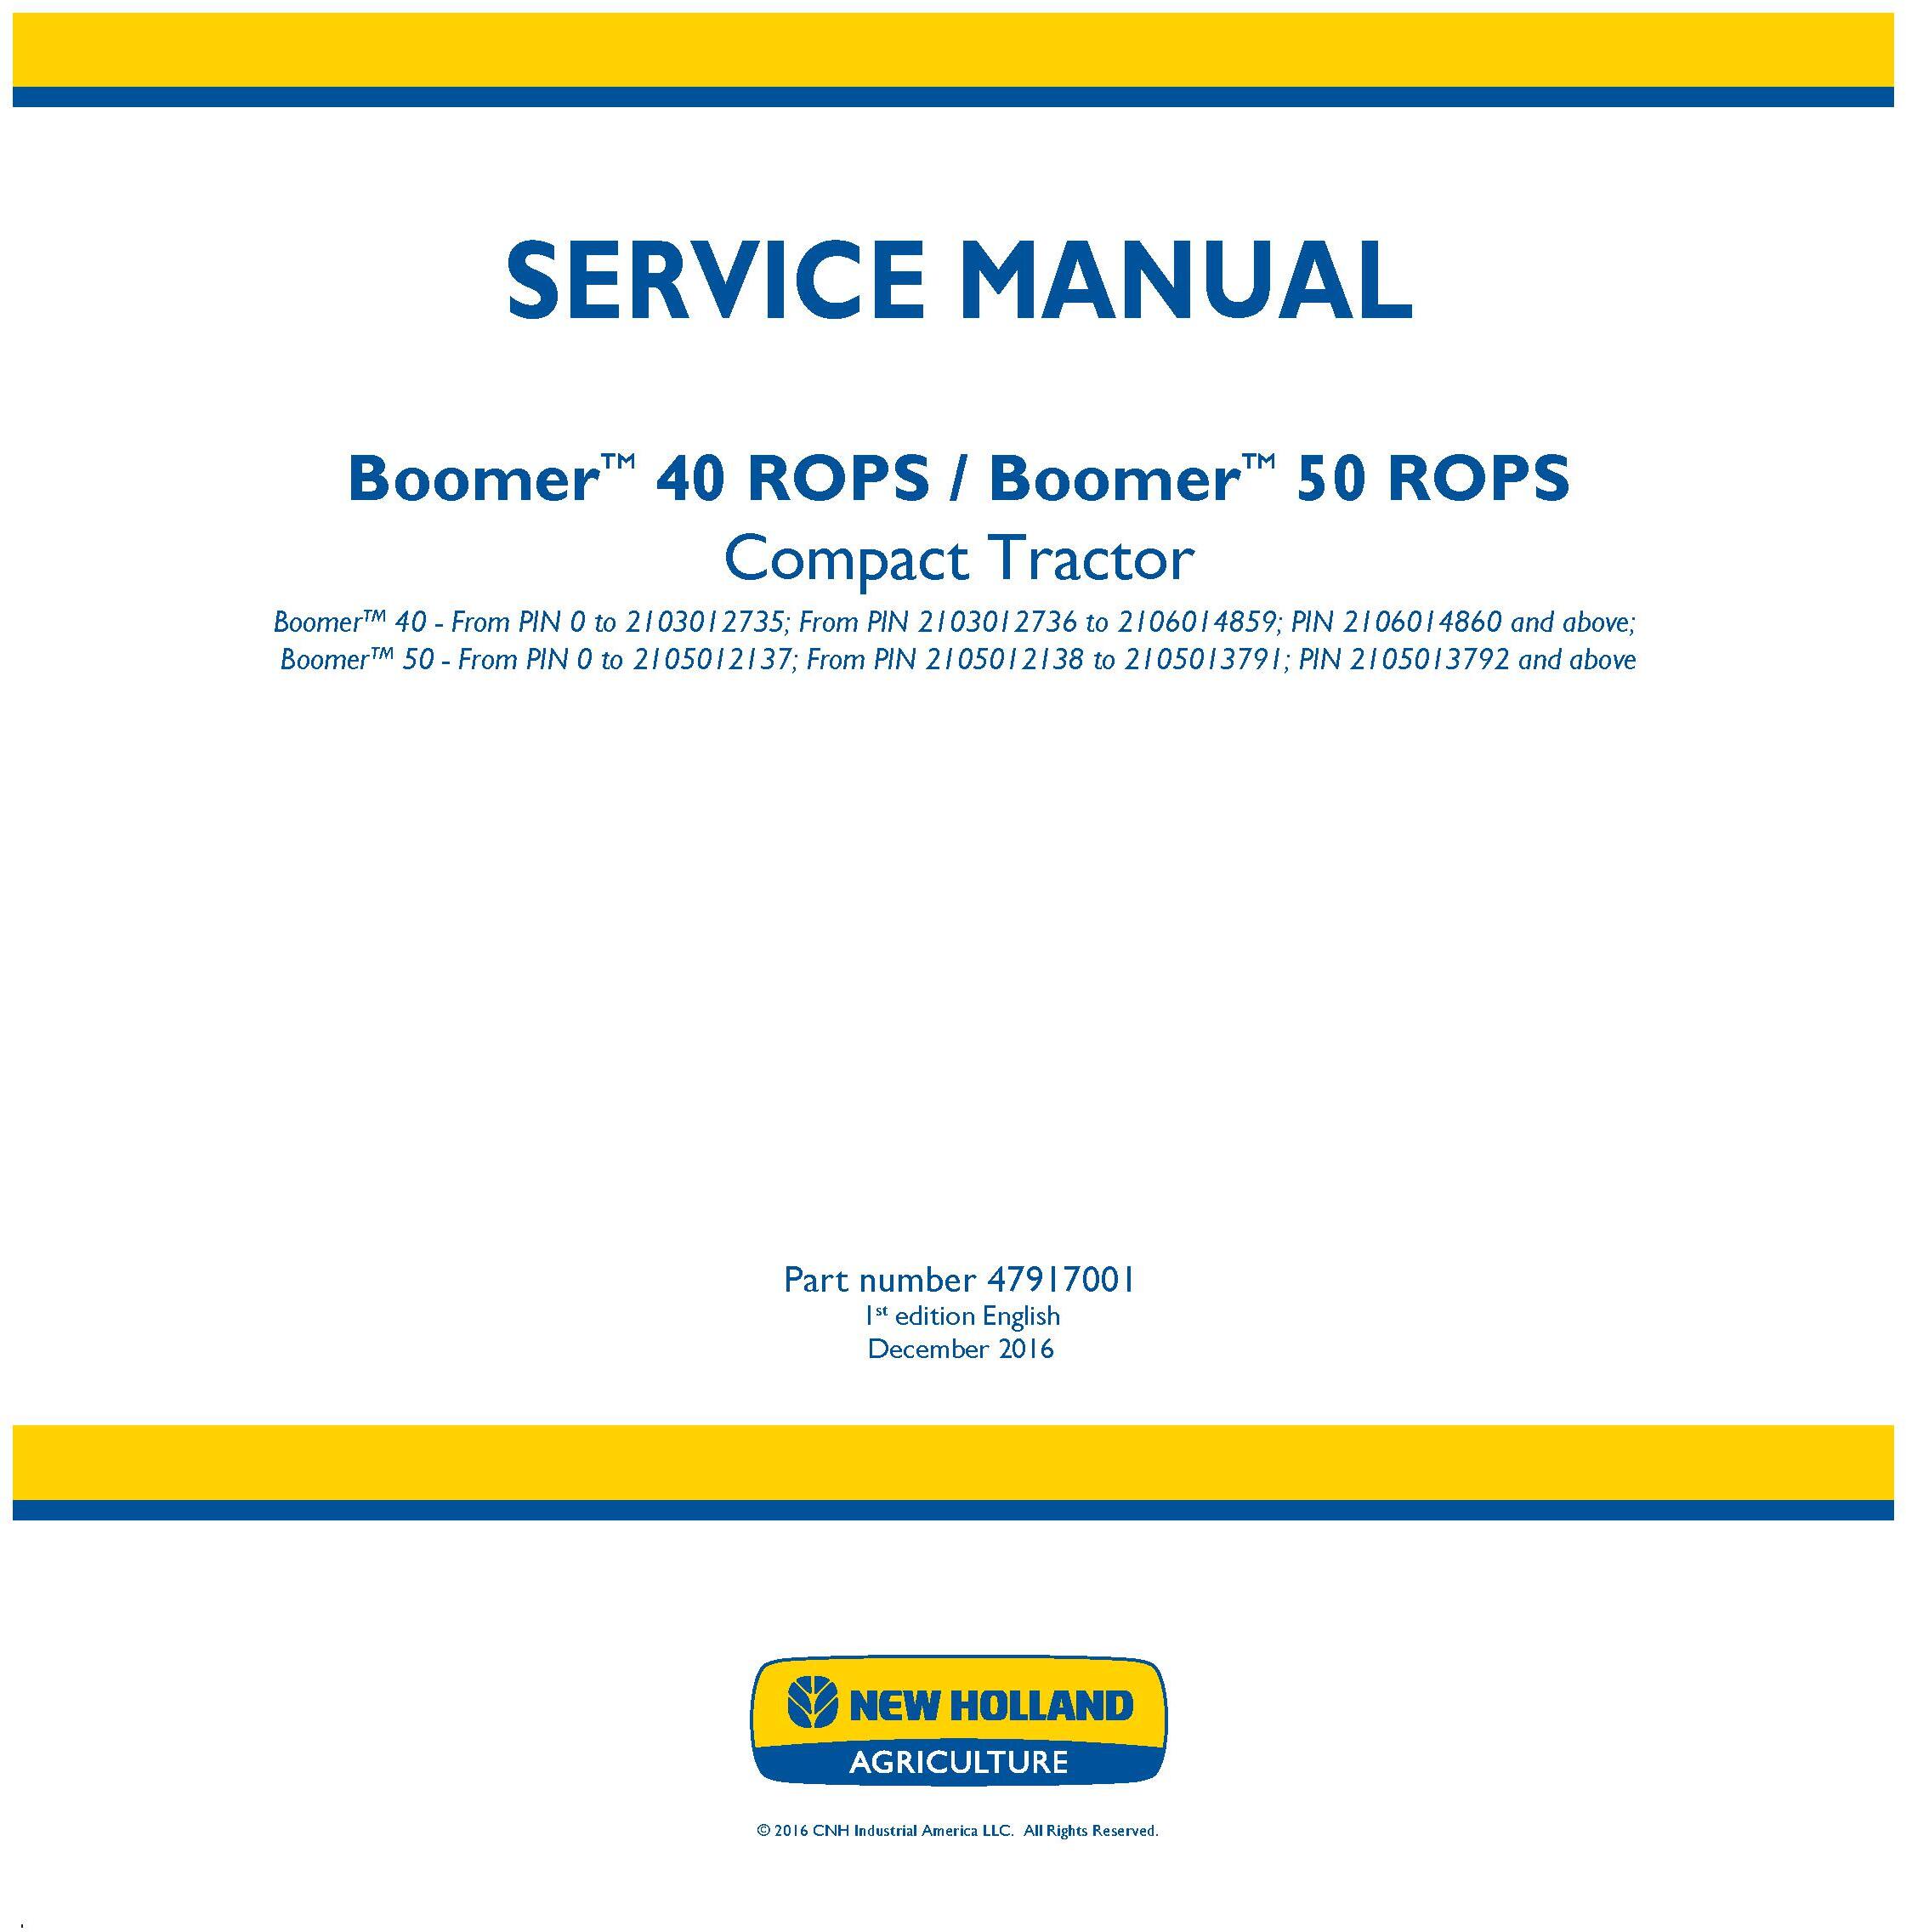 New Holland Boomer 40 ROPS, Boomer 50 ROPS Compact Tractor Service Manual (Europe) - 19452